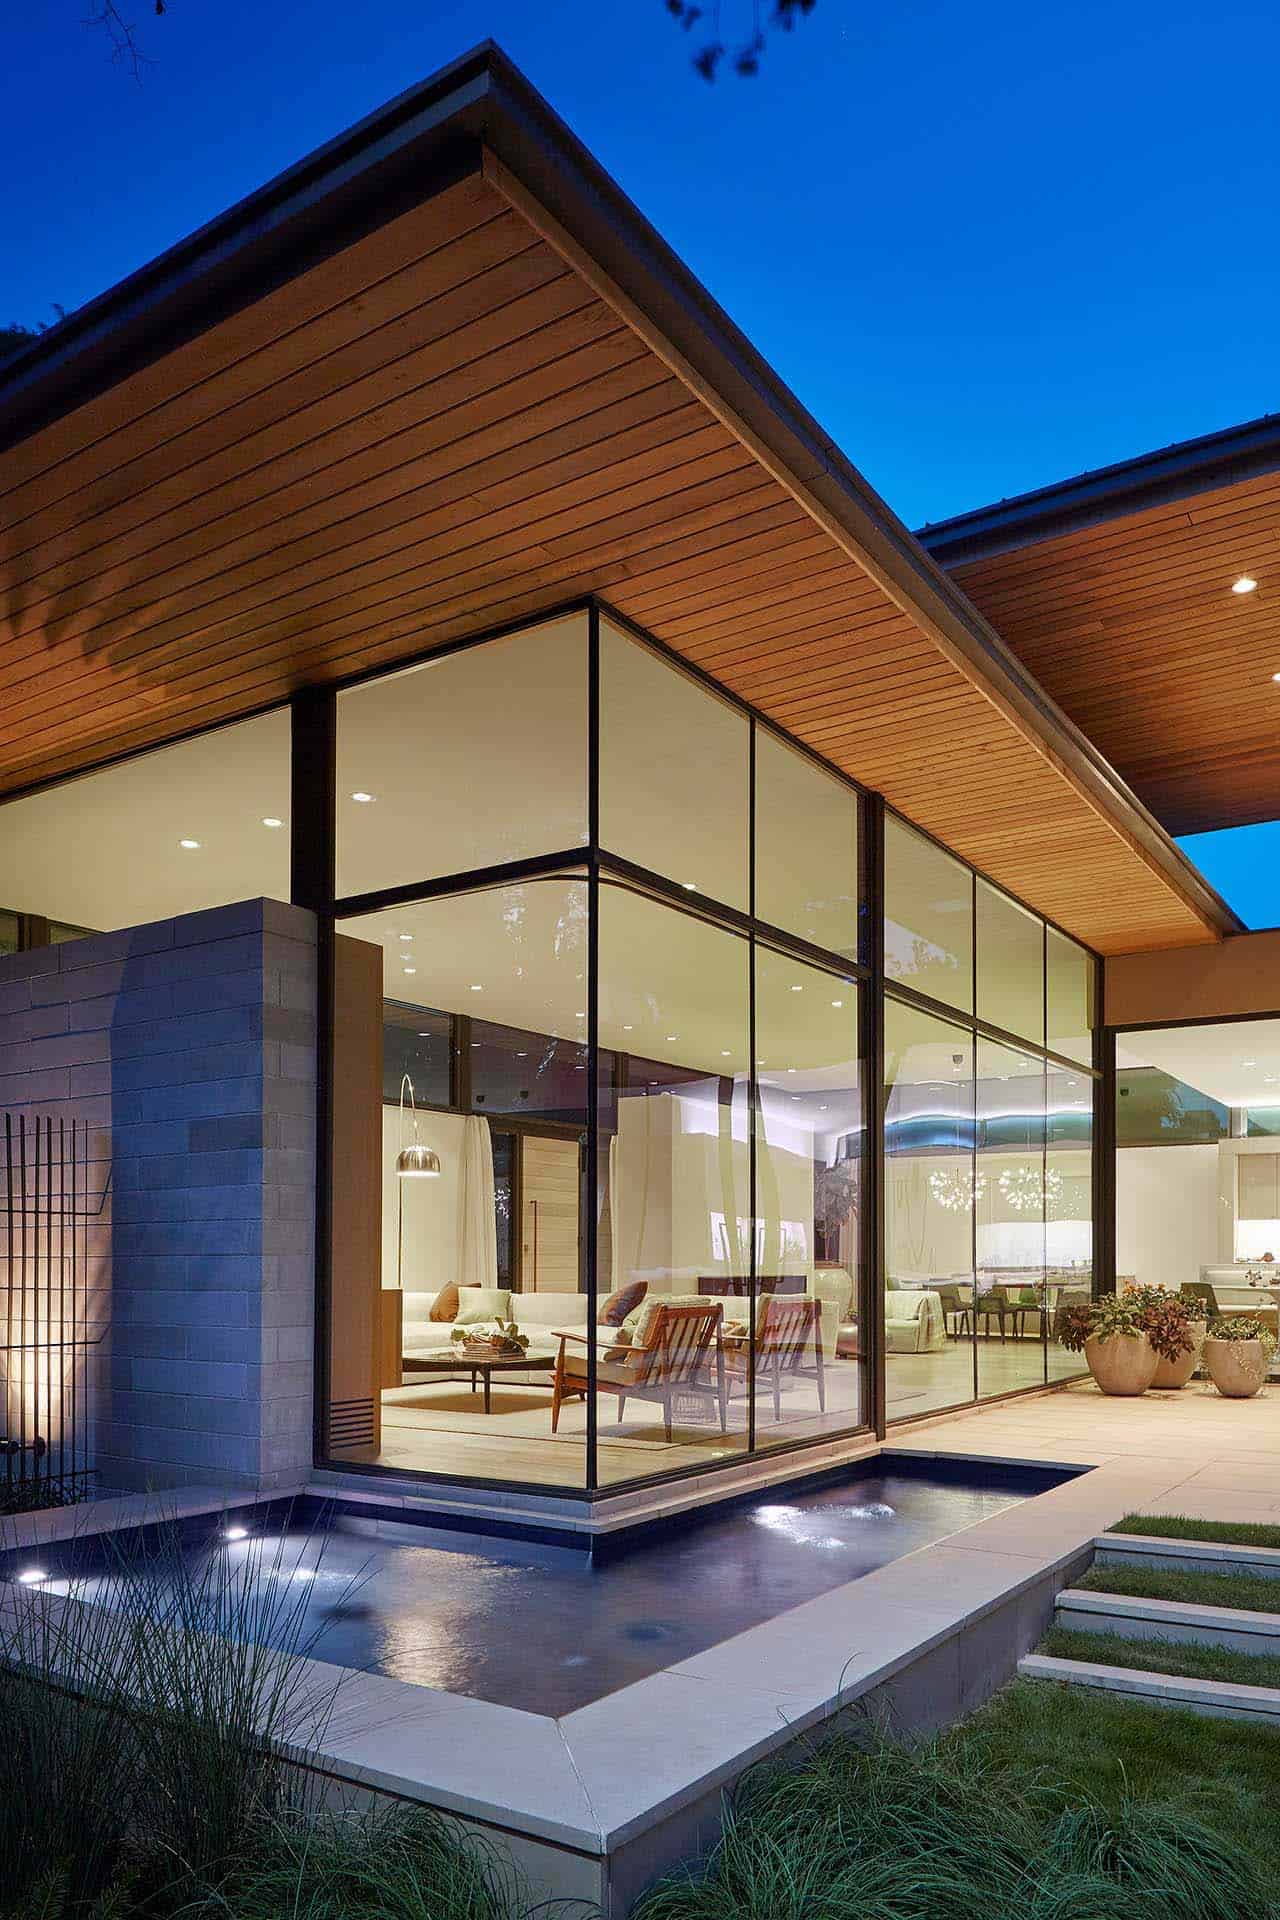 modern courtyard house exterior backyard patio with a swimming pool at dusk